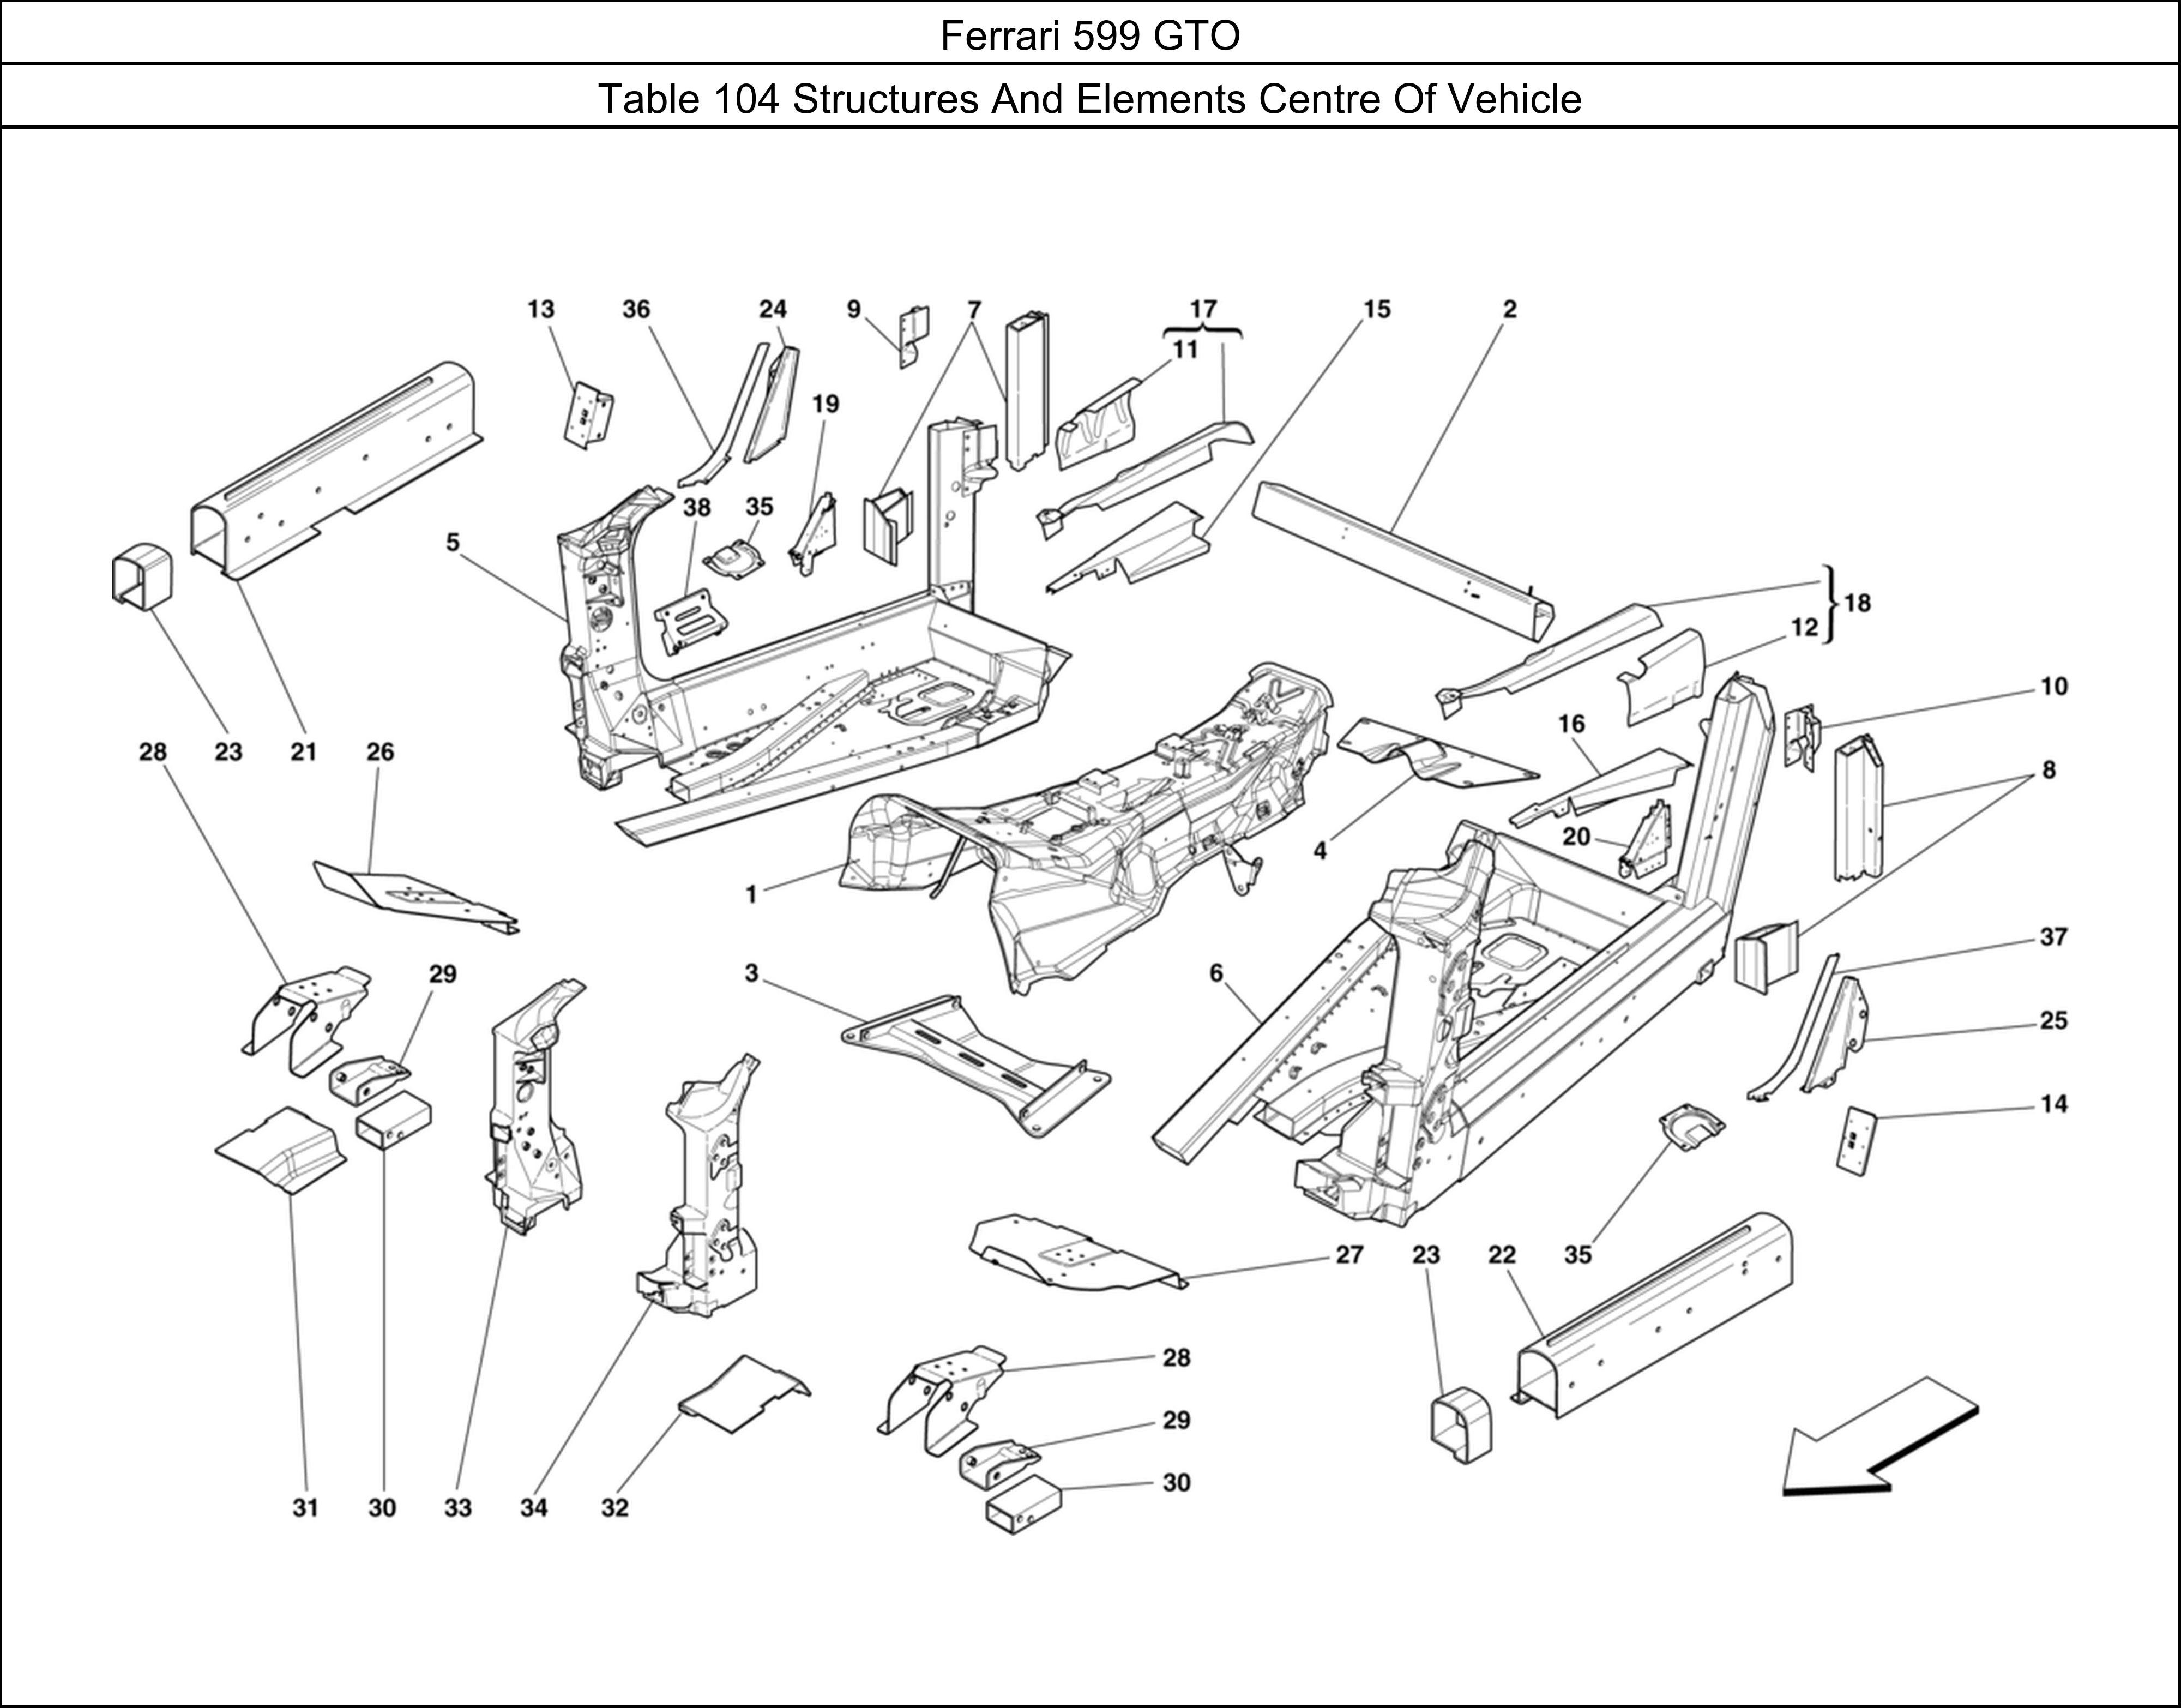 Ferrari Parts Ferrari 599 GTO Table 104 Structures And Elements Centre Of Vehicle